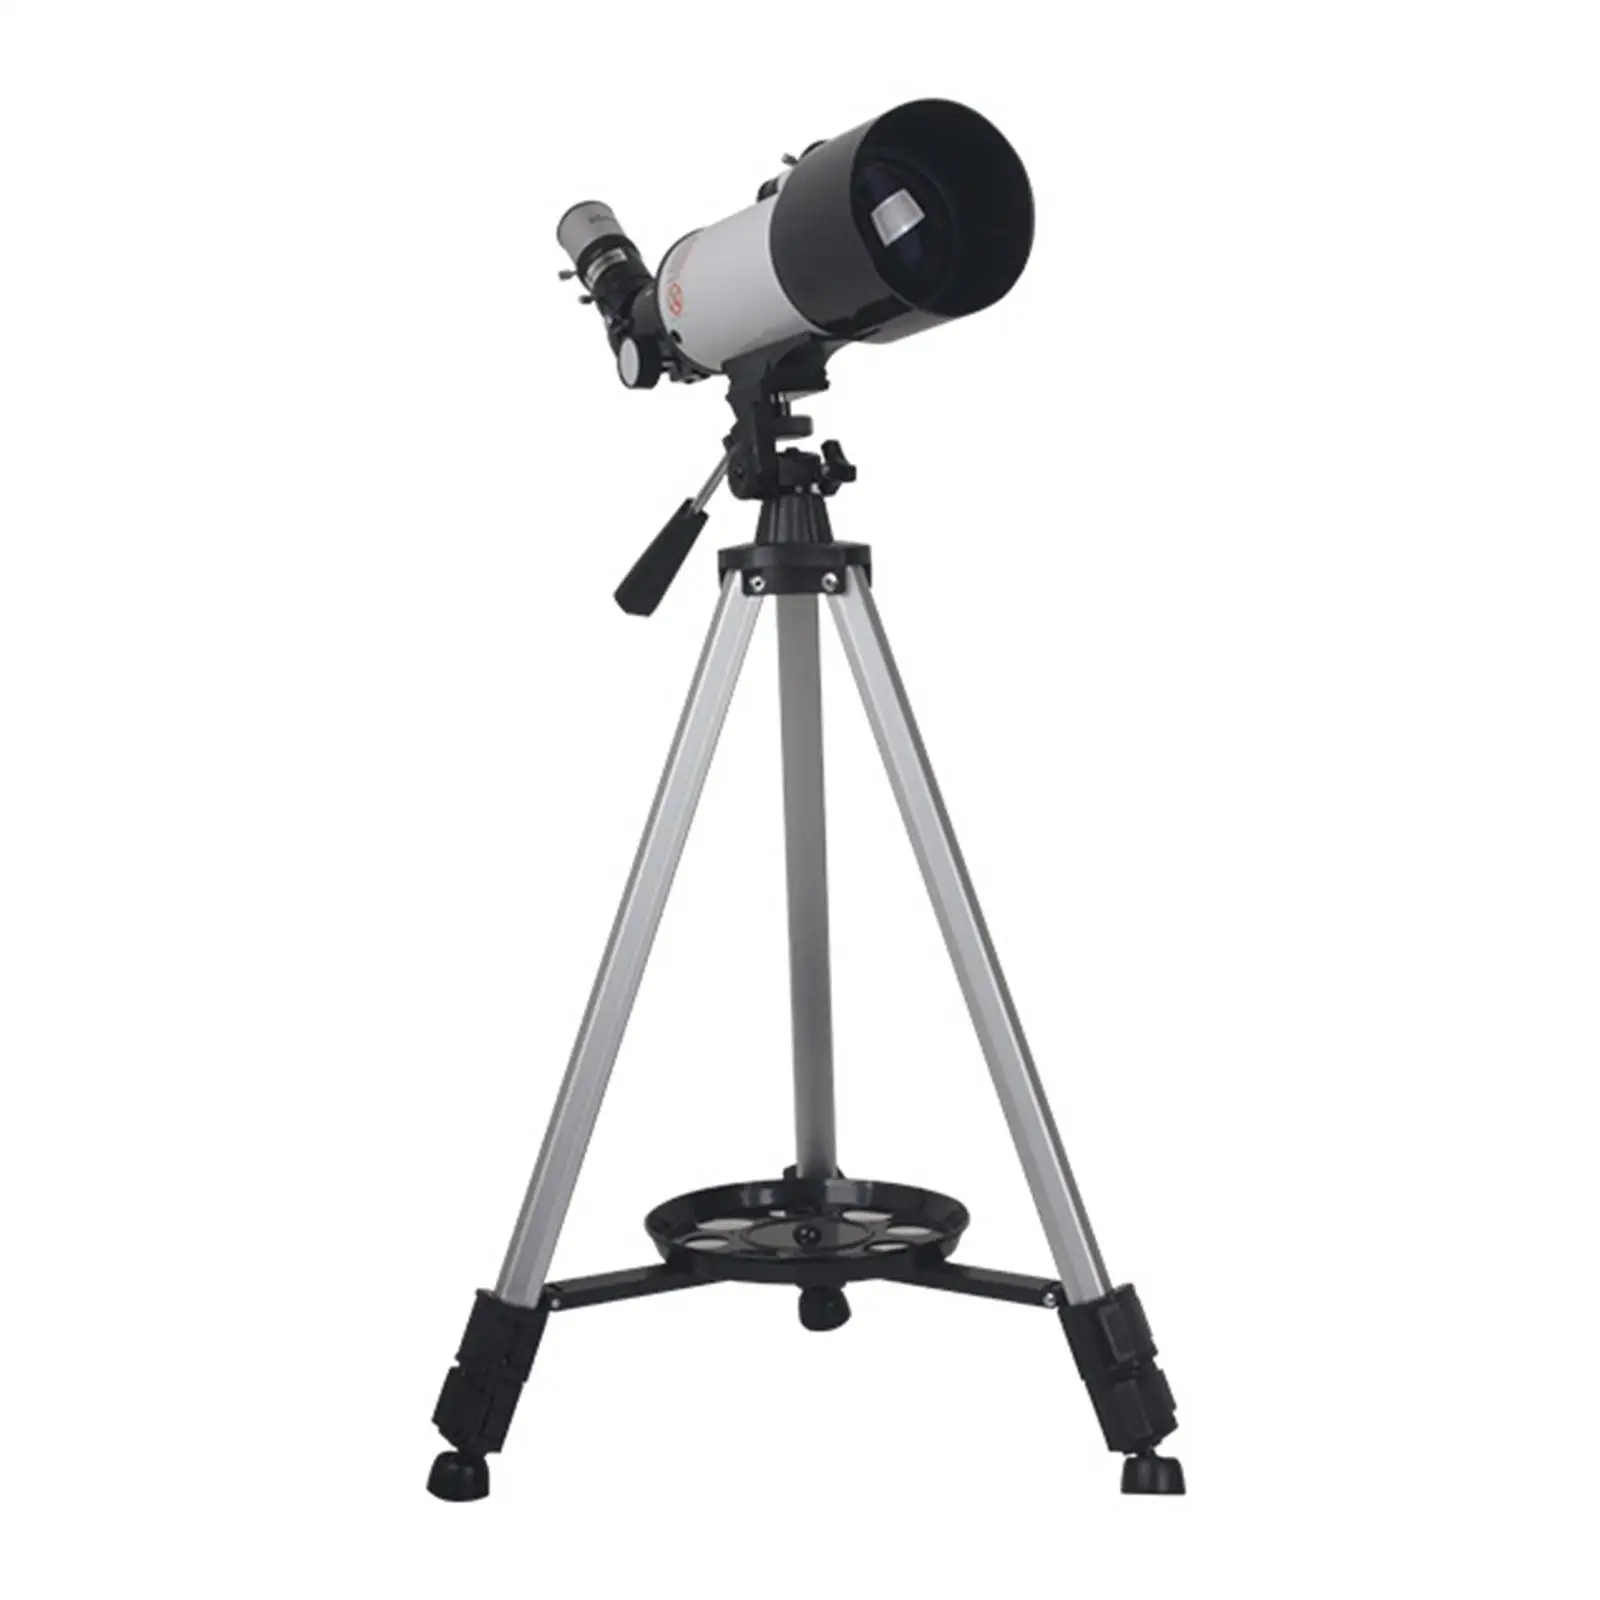 70mm 400mm Telescope with Tripod for Beginners Simple to Setup Erect Image Optics Astronomy Refractor Telescope Accessories